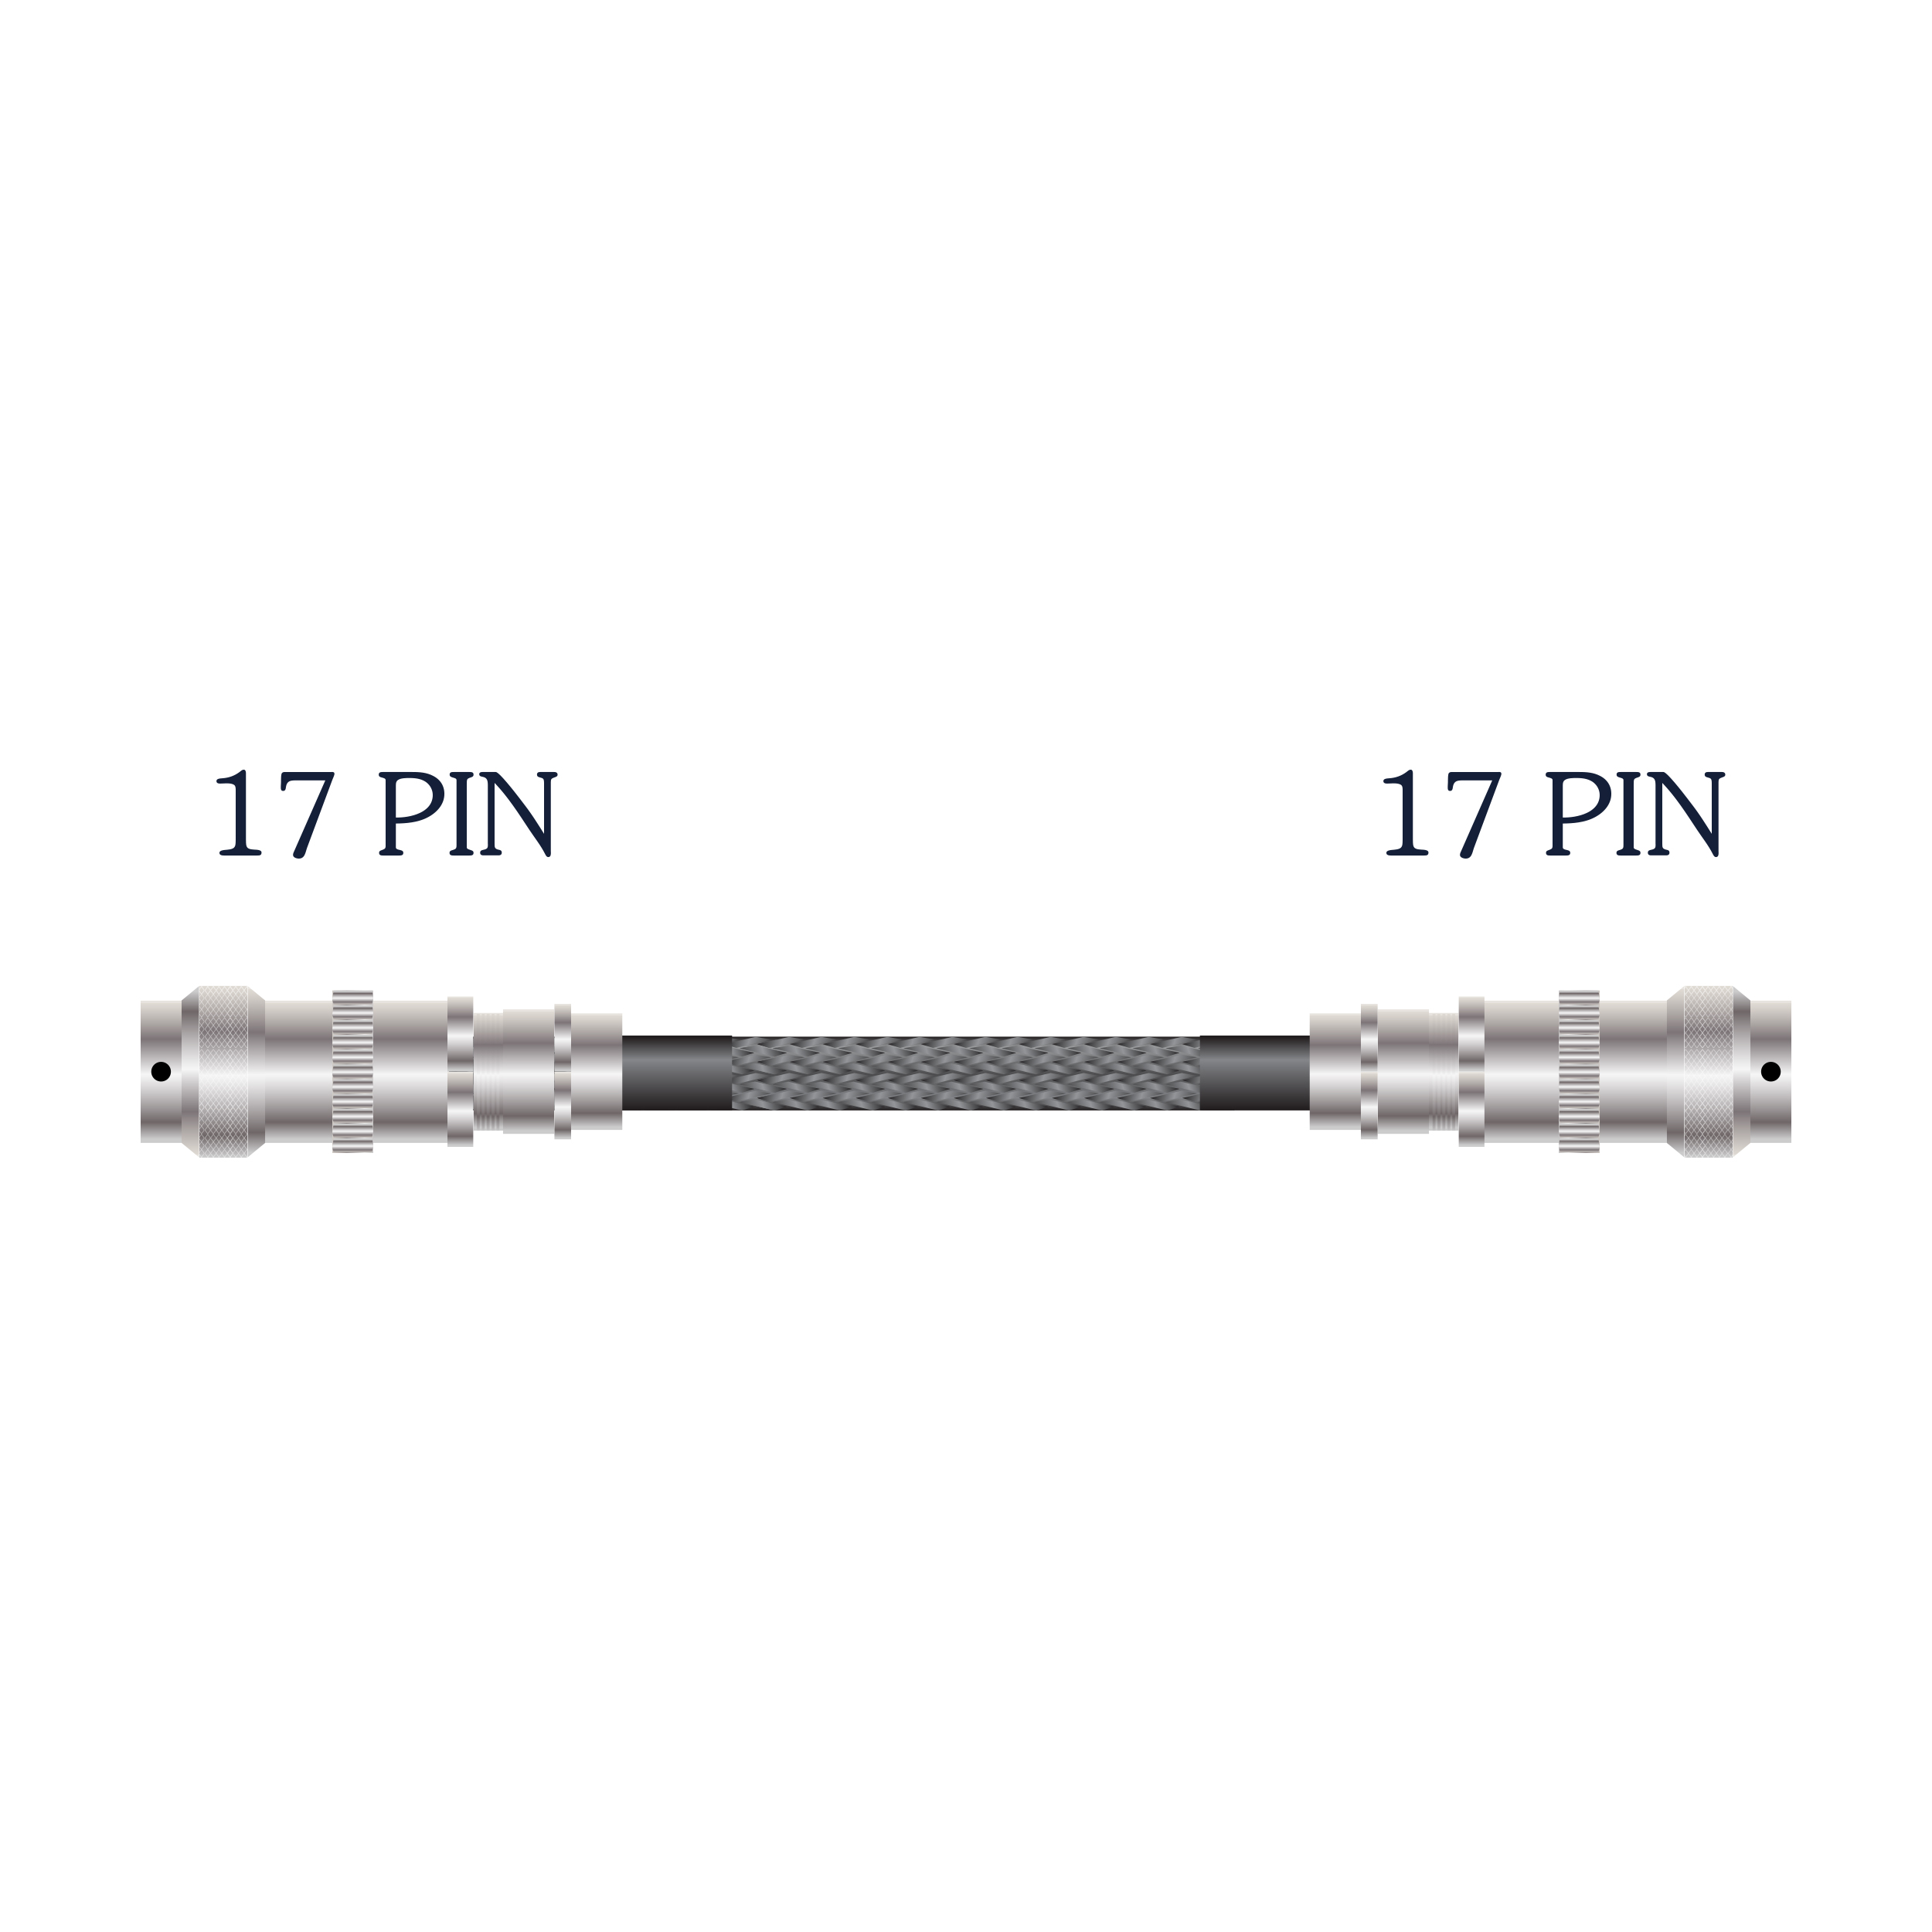 <p align="center">Tyr 2 Specialty 17 Pin Cable</p>